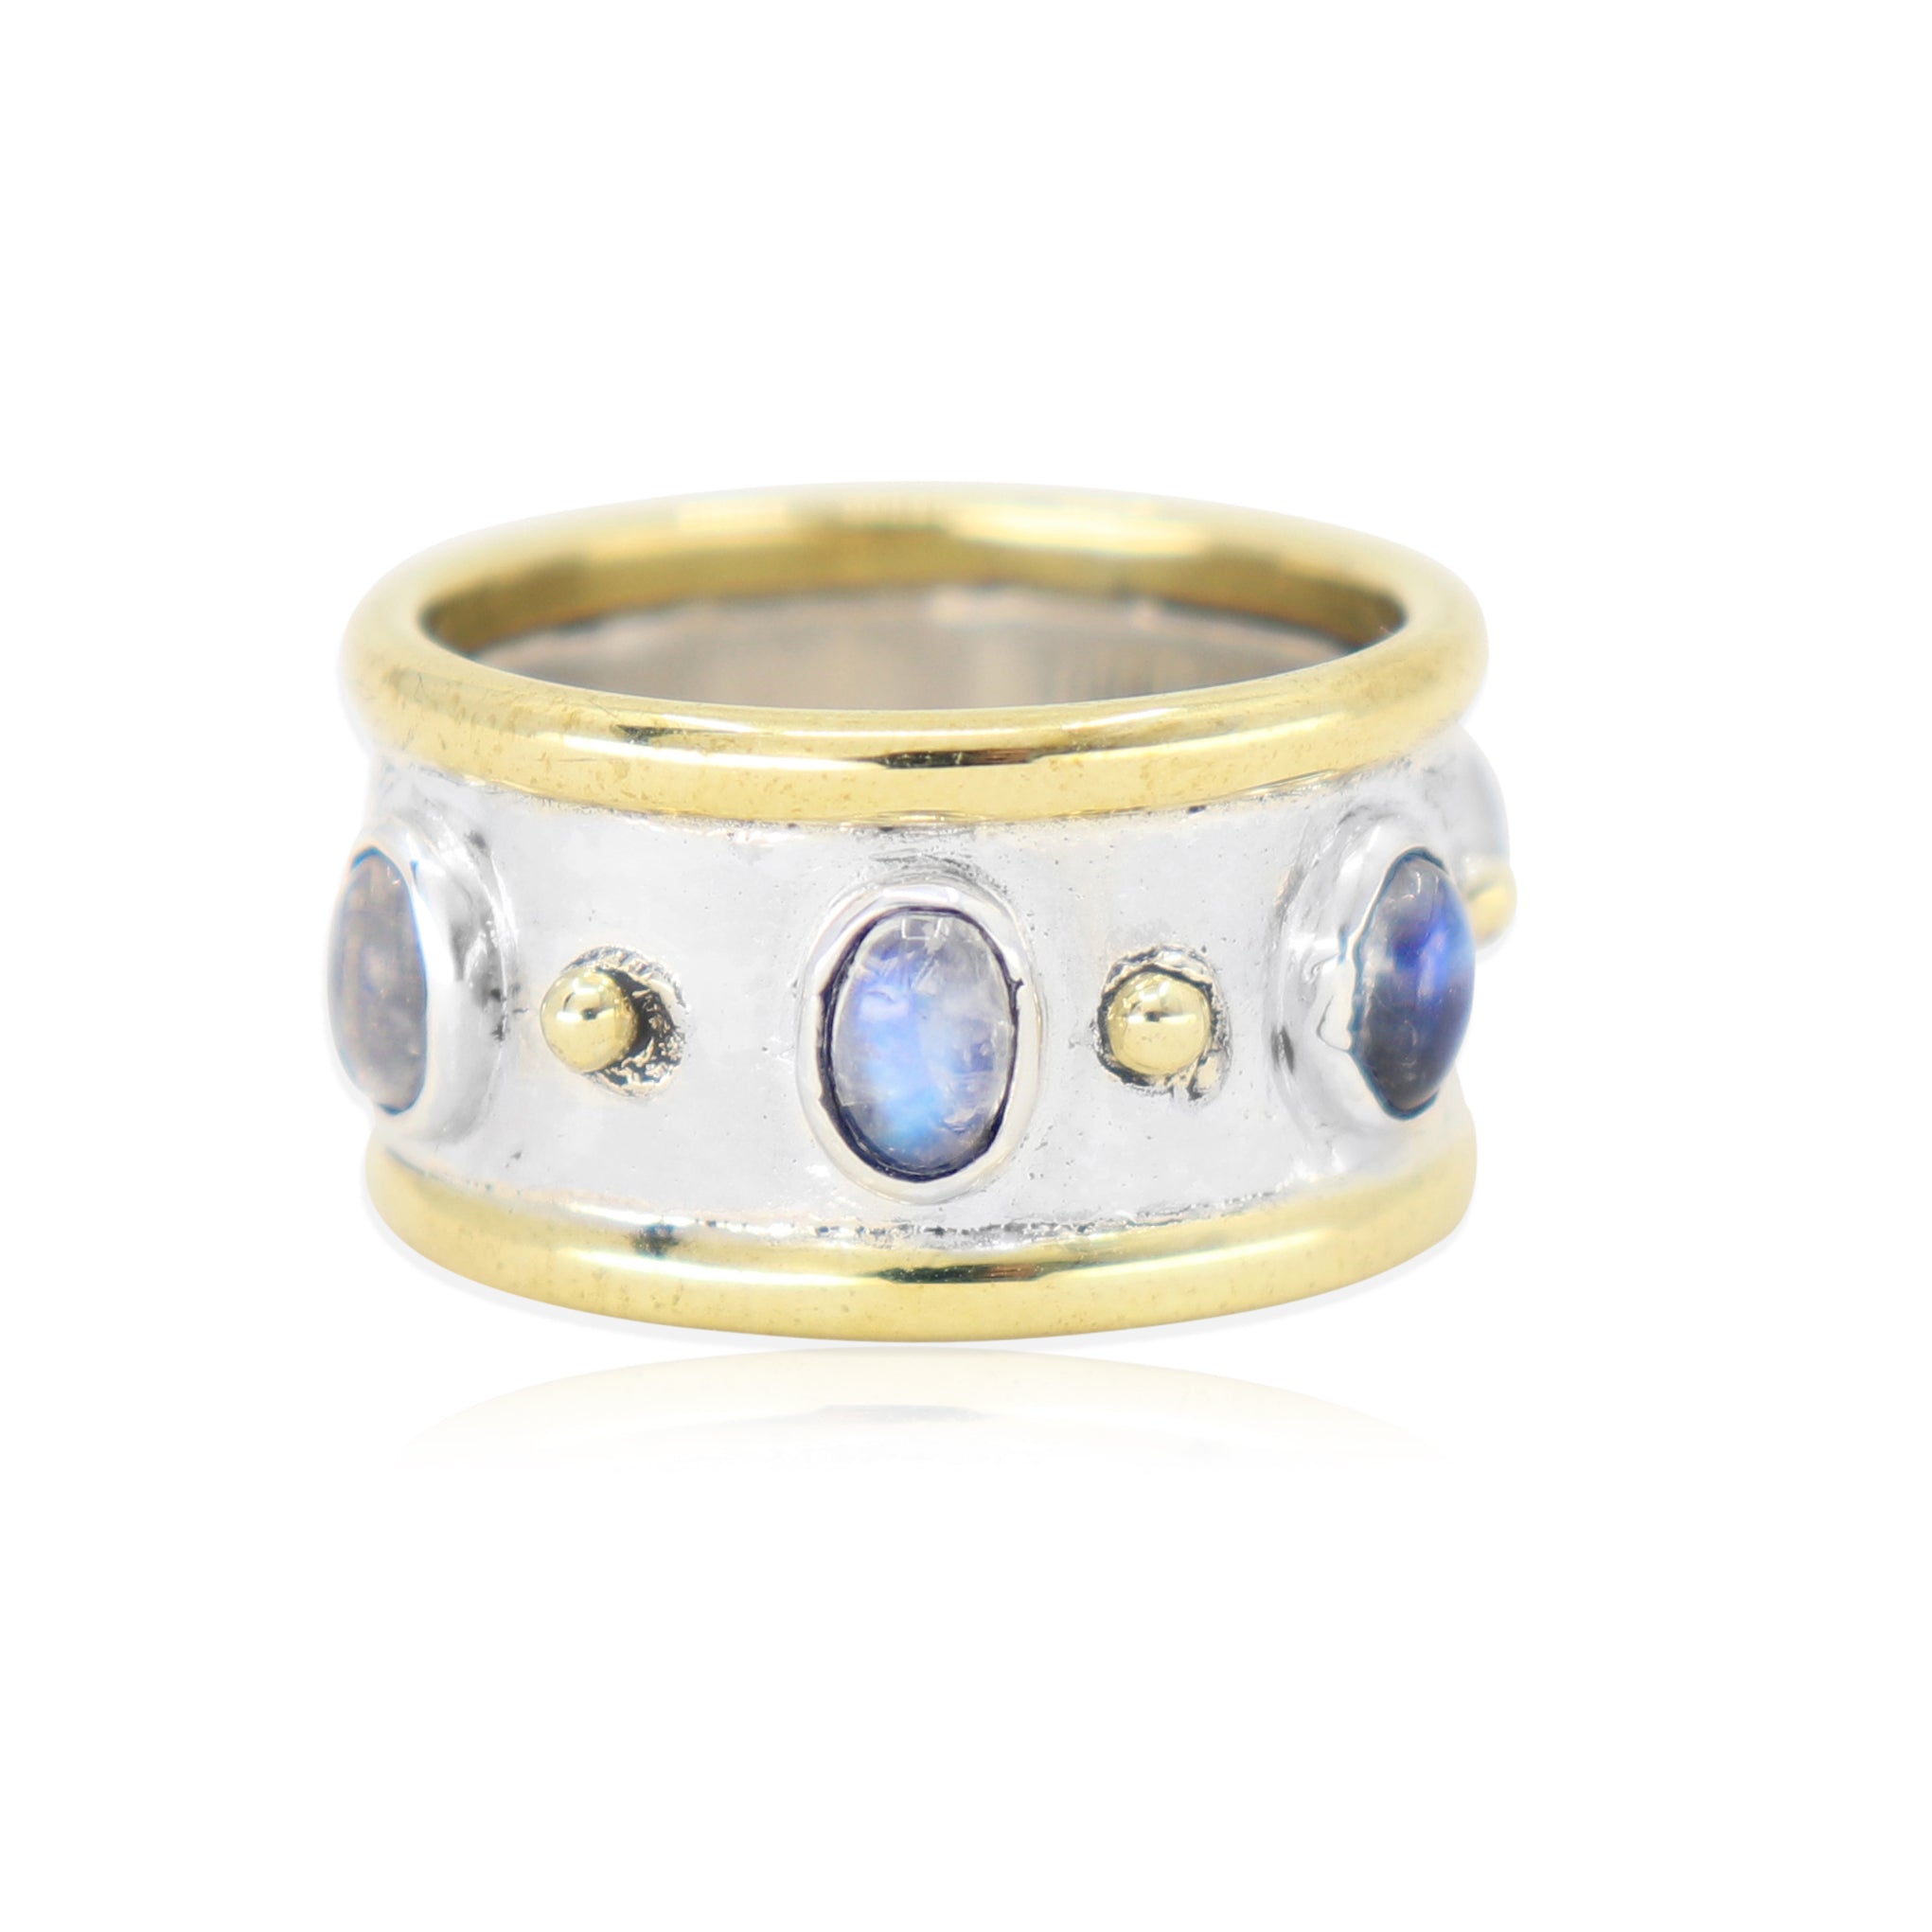 The Imperial Moonstone Ring